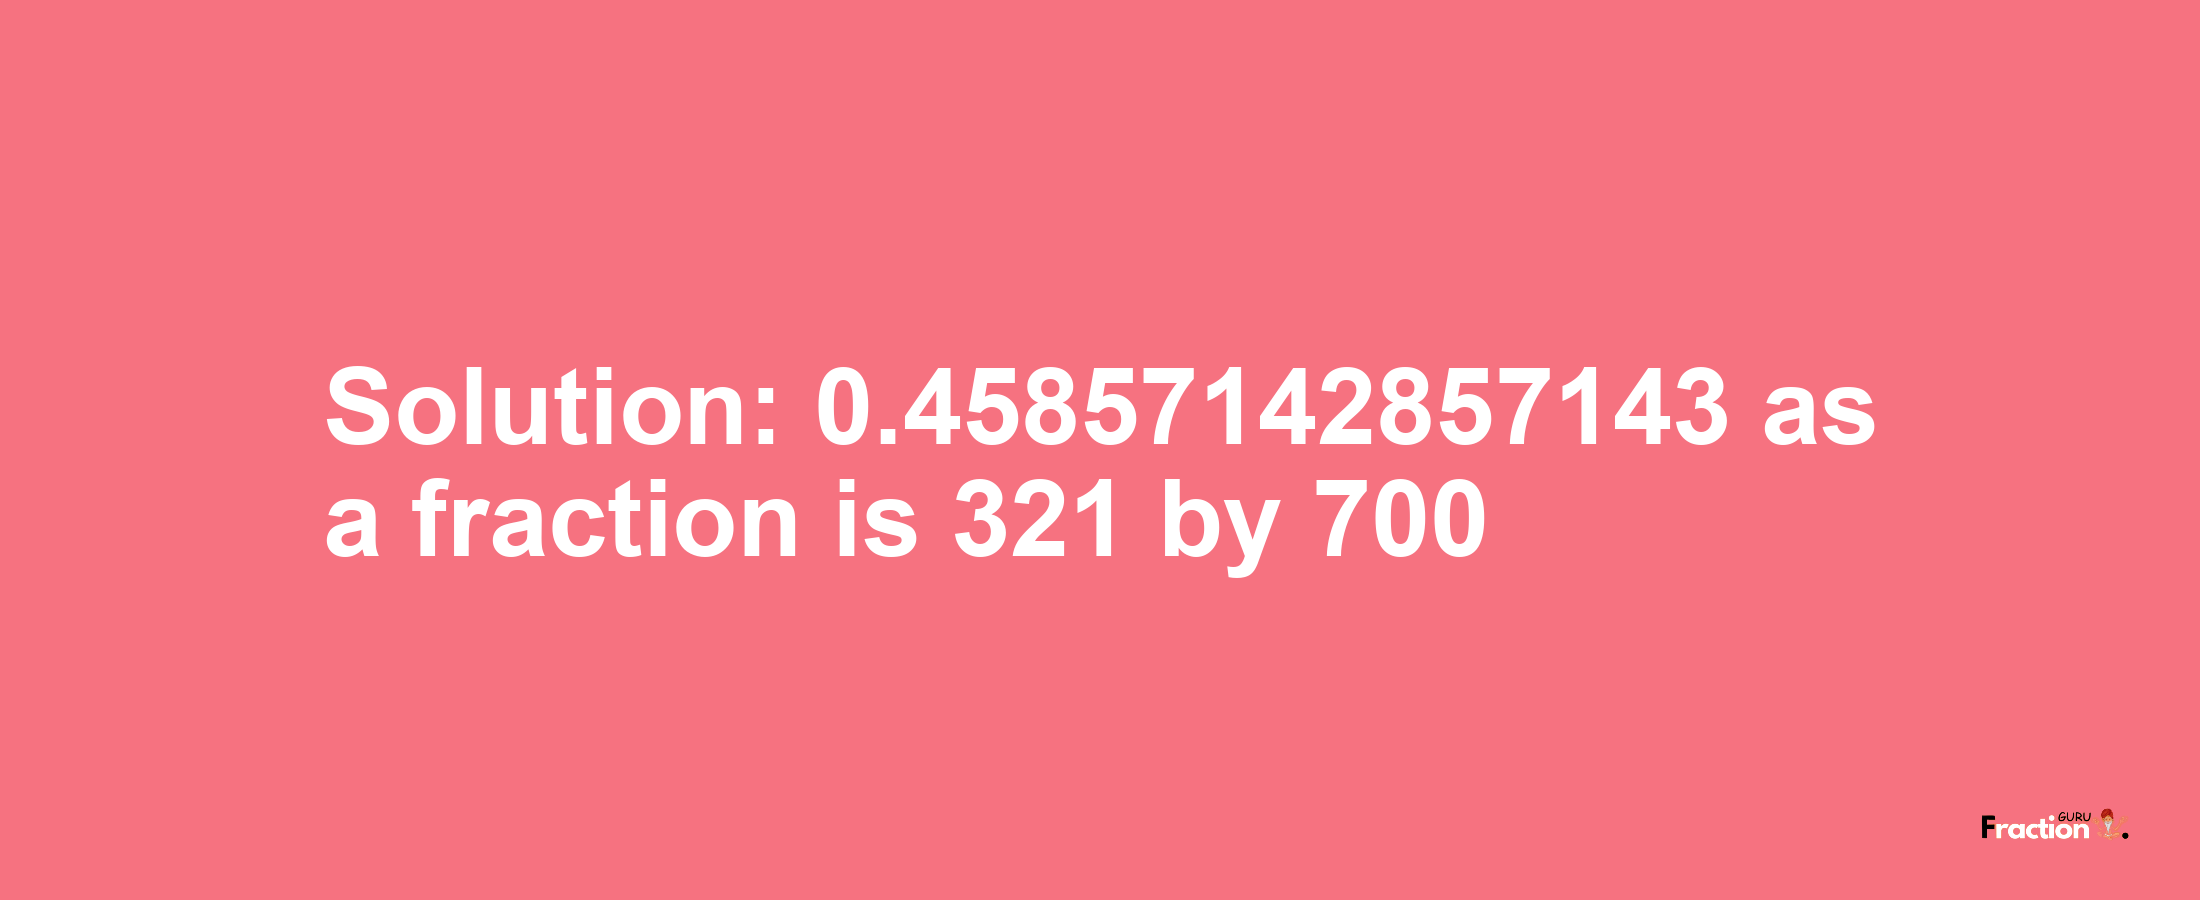 Solution:0.45857142857143 as a fraction is 321/700